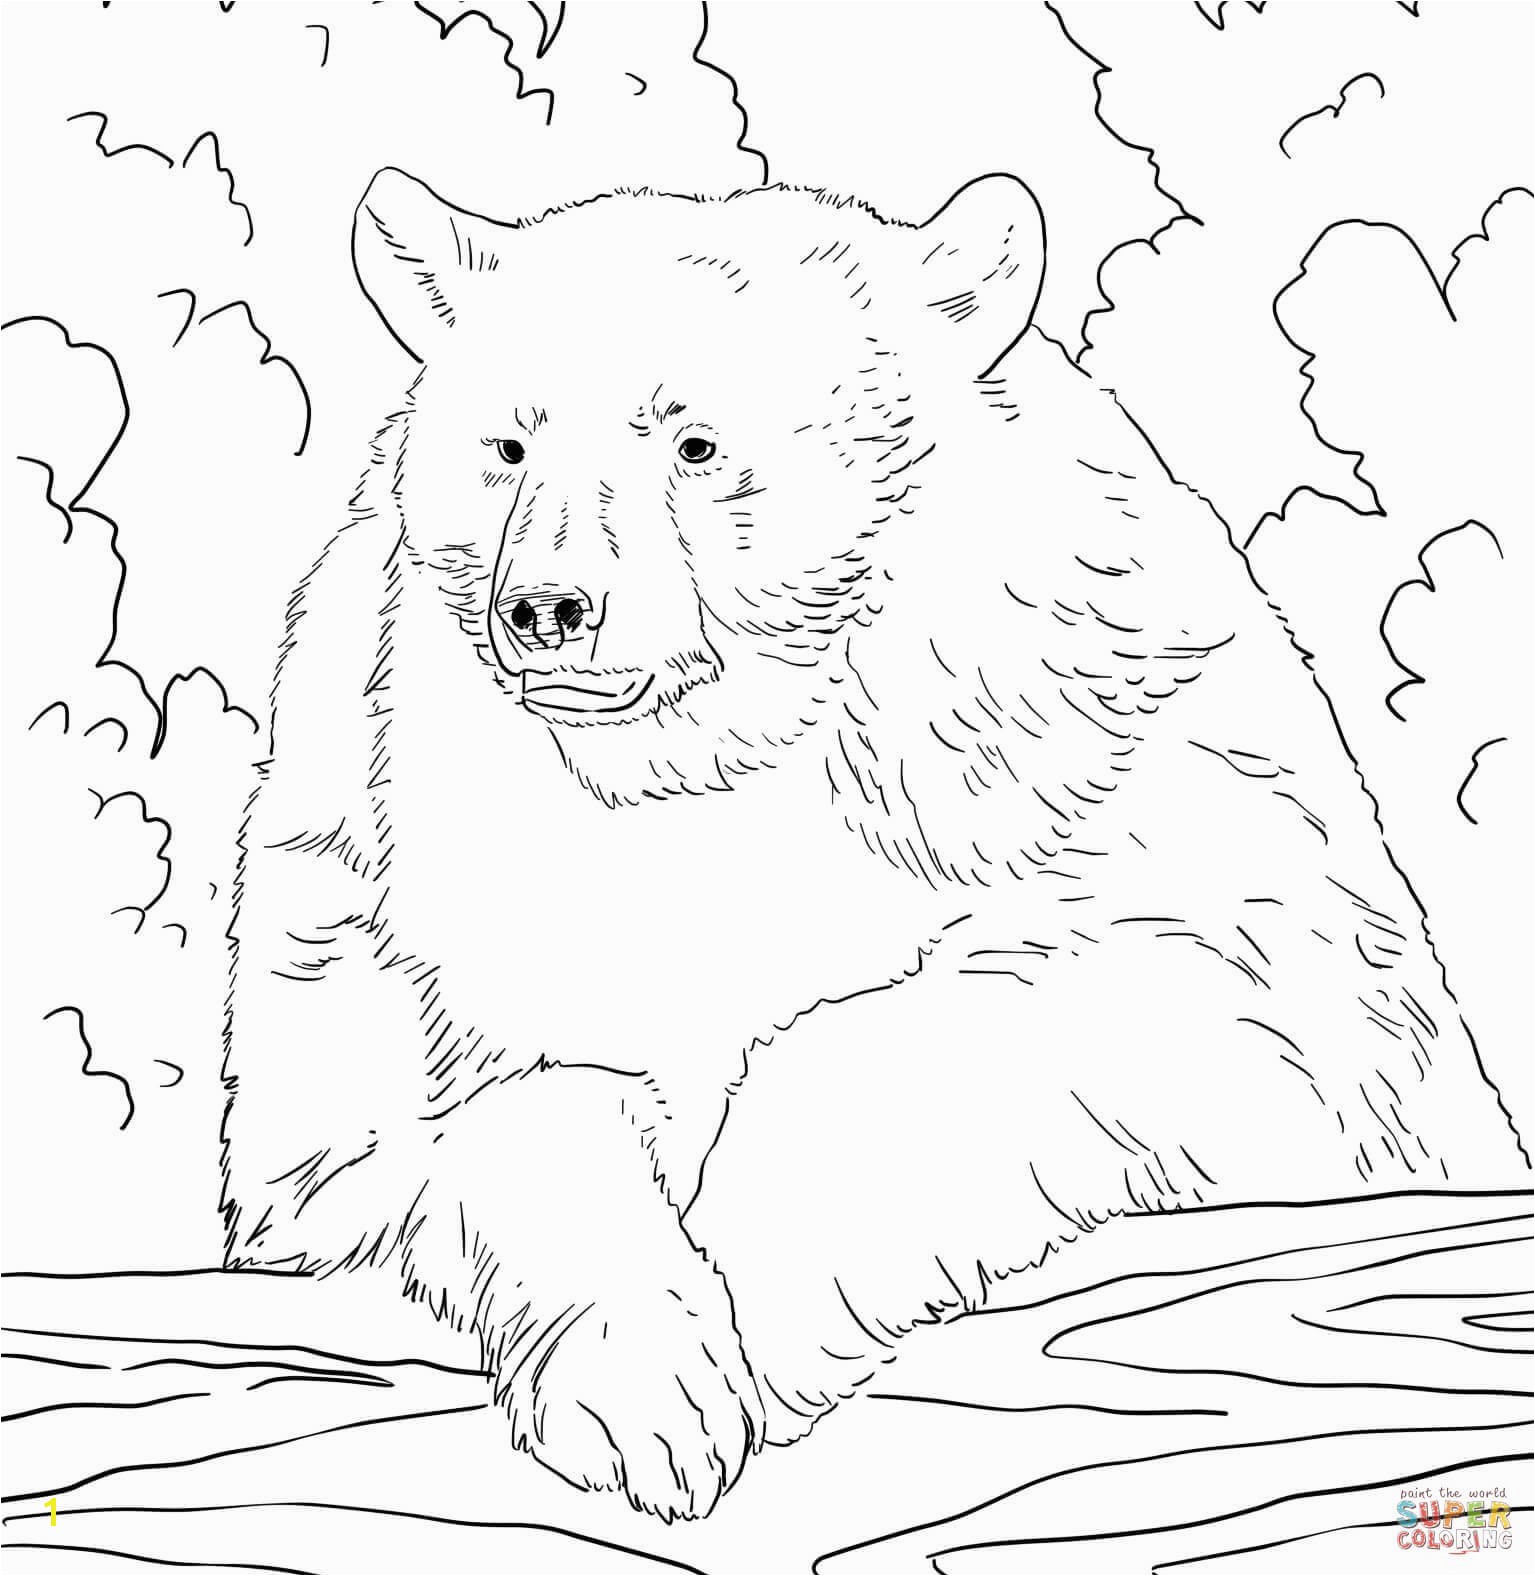 Grizzly Bear Coloring Pages Grizzly Bear Coloring Page Coloring Pages